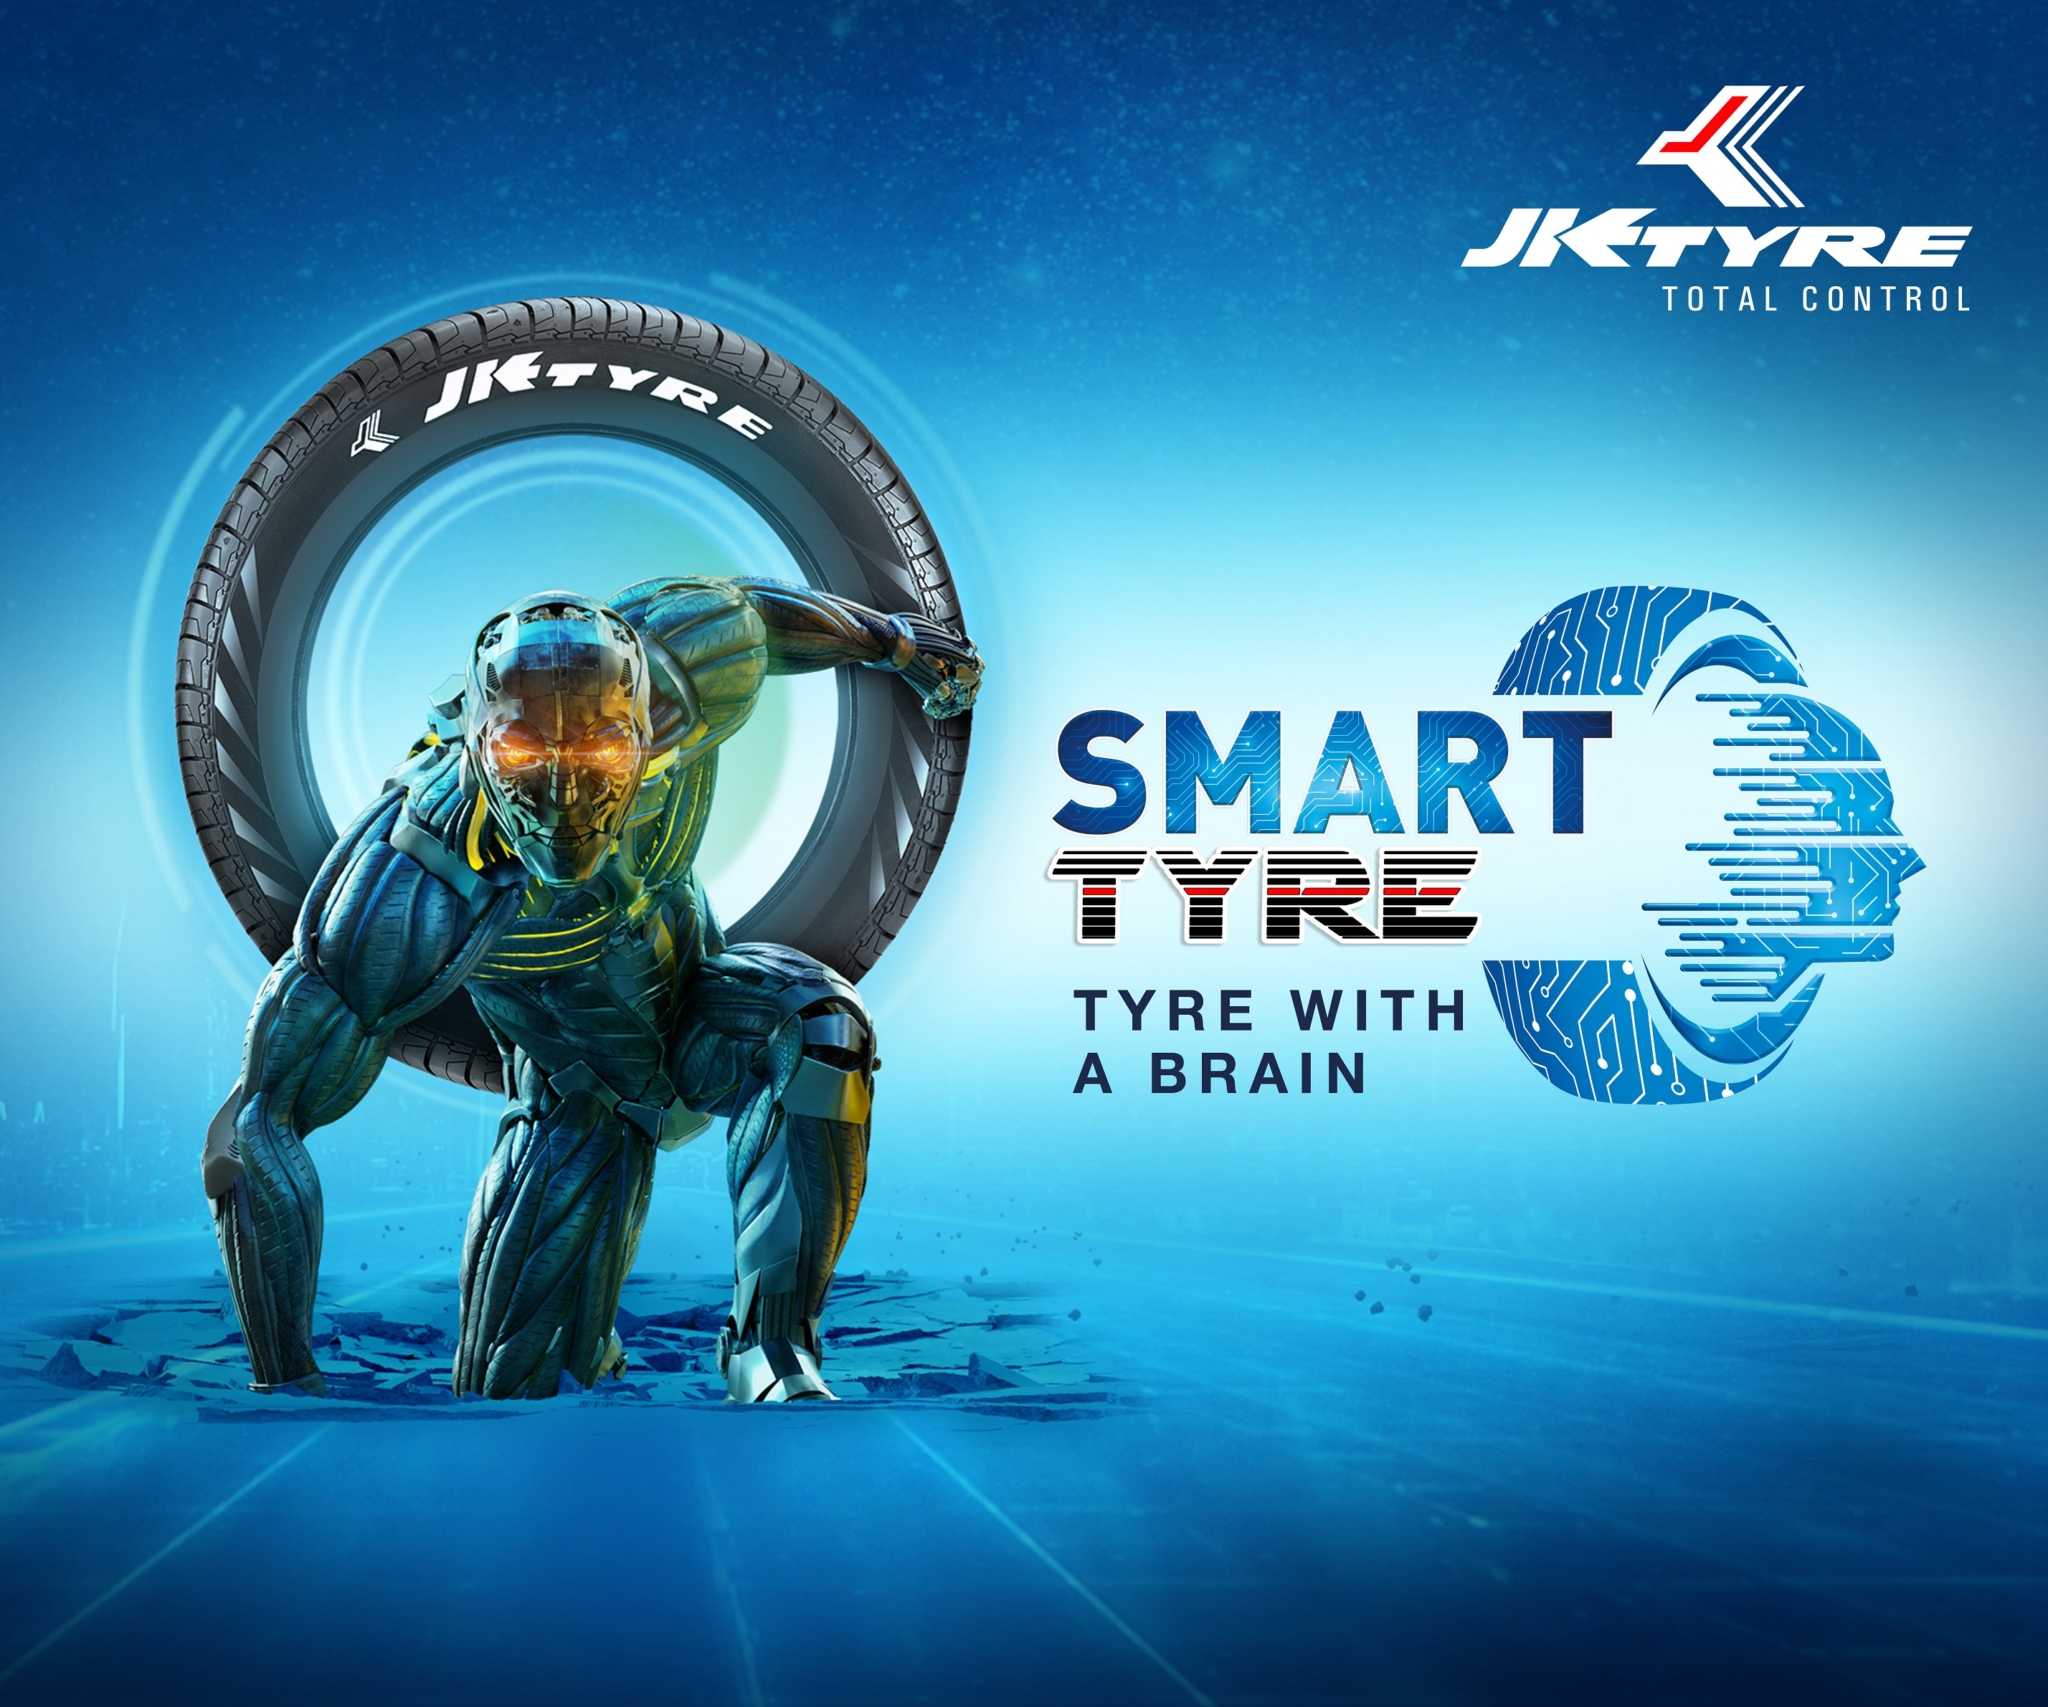 JK Tyre markets ‘tyres with a brain’